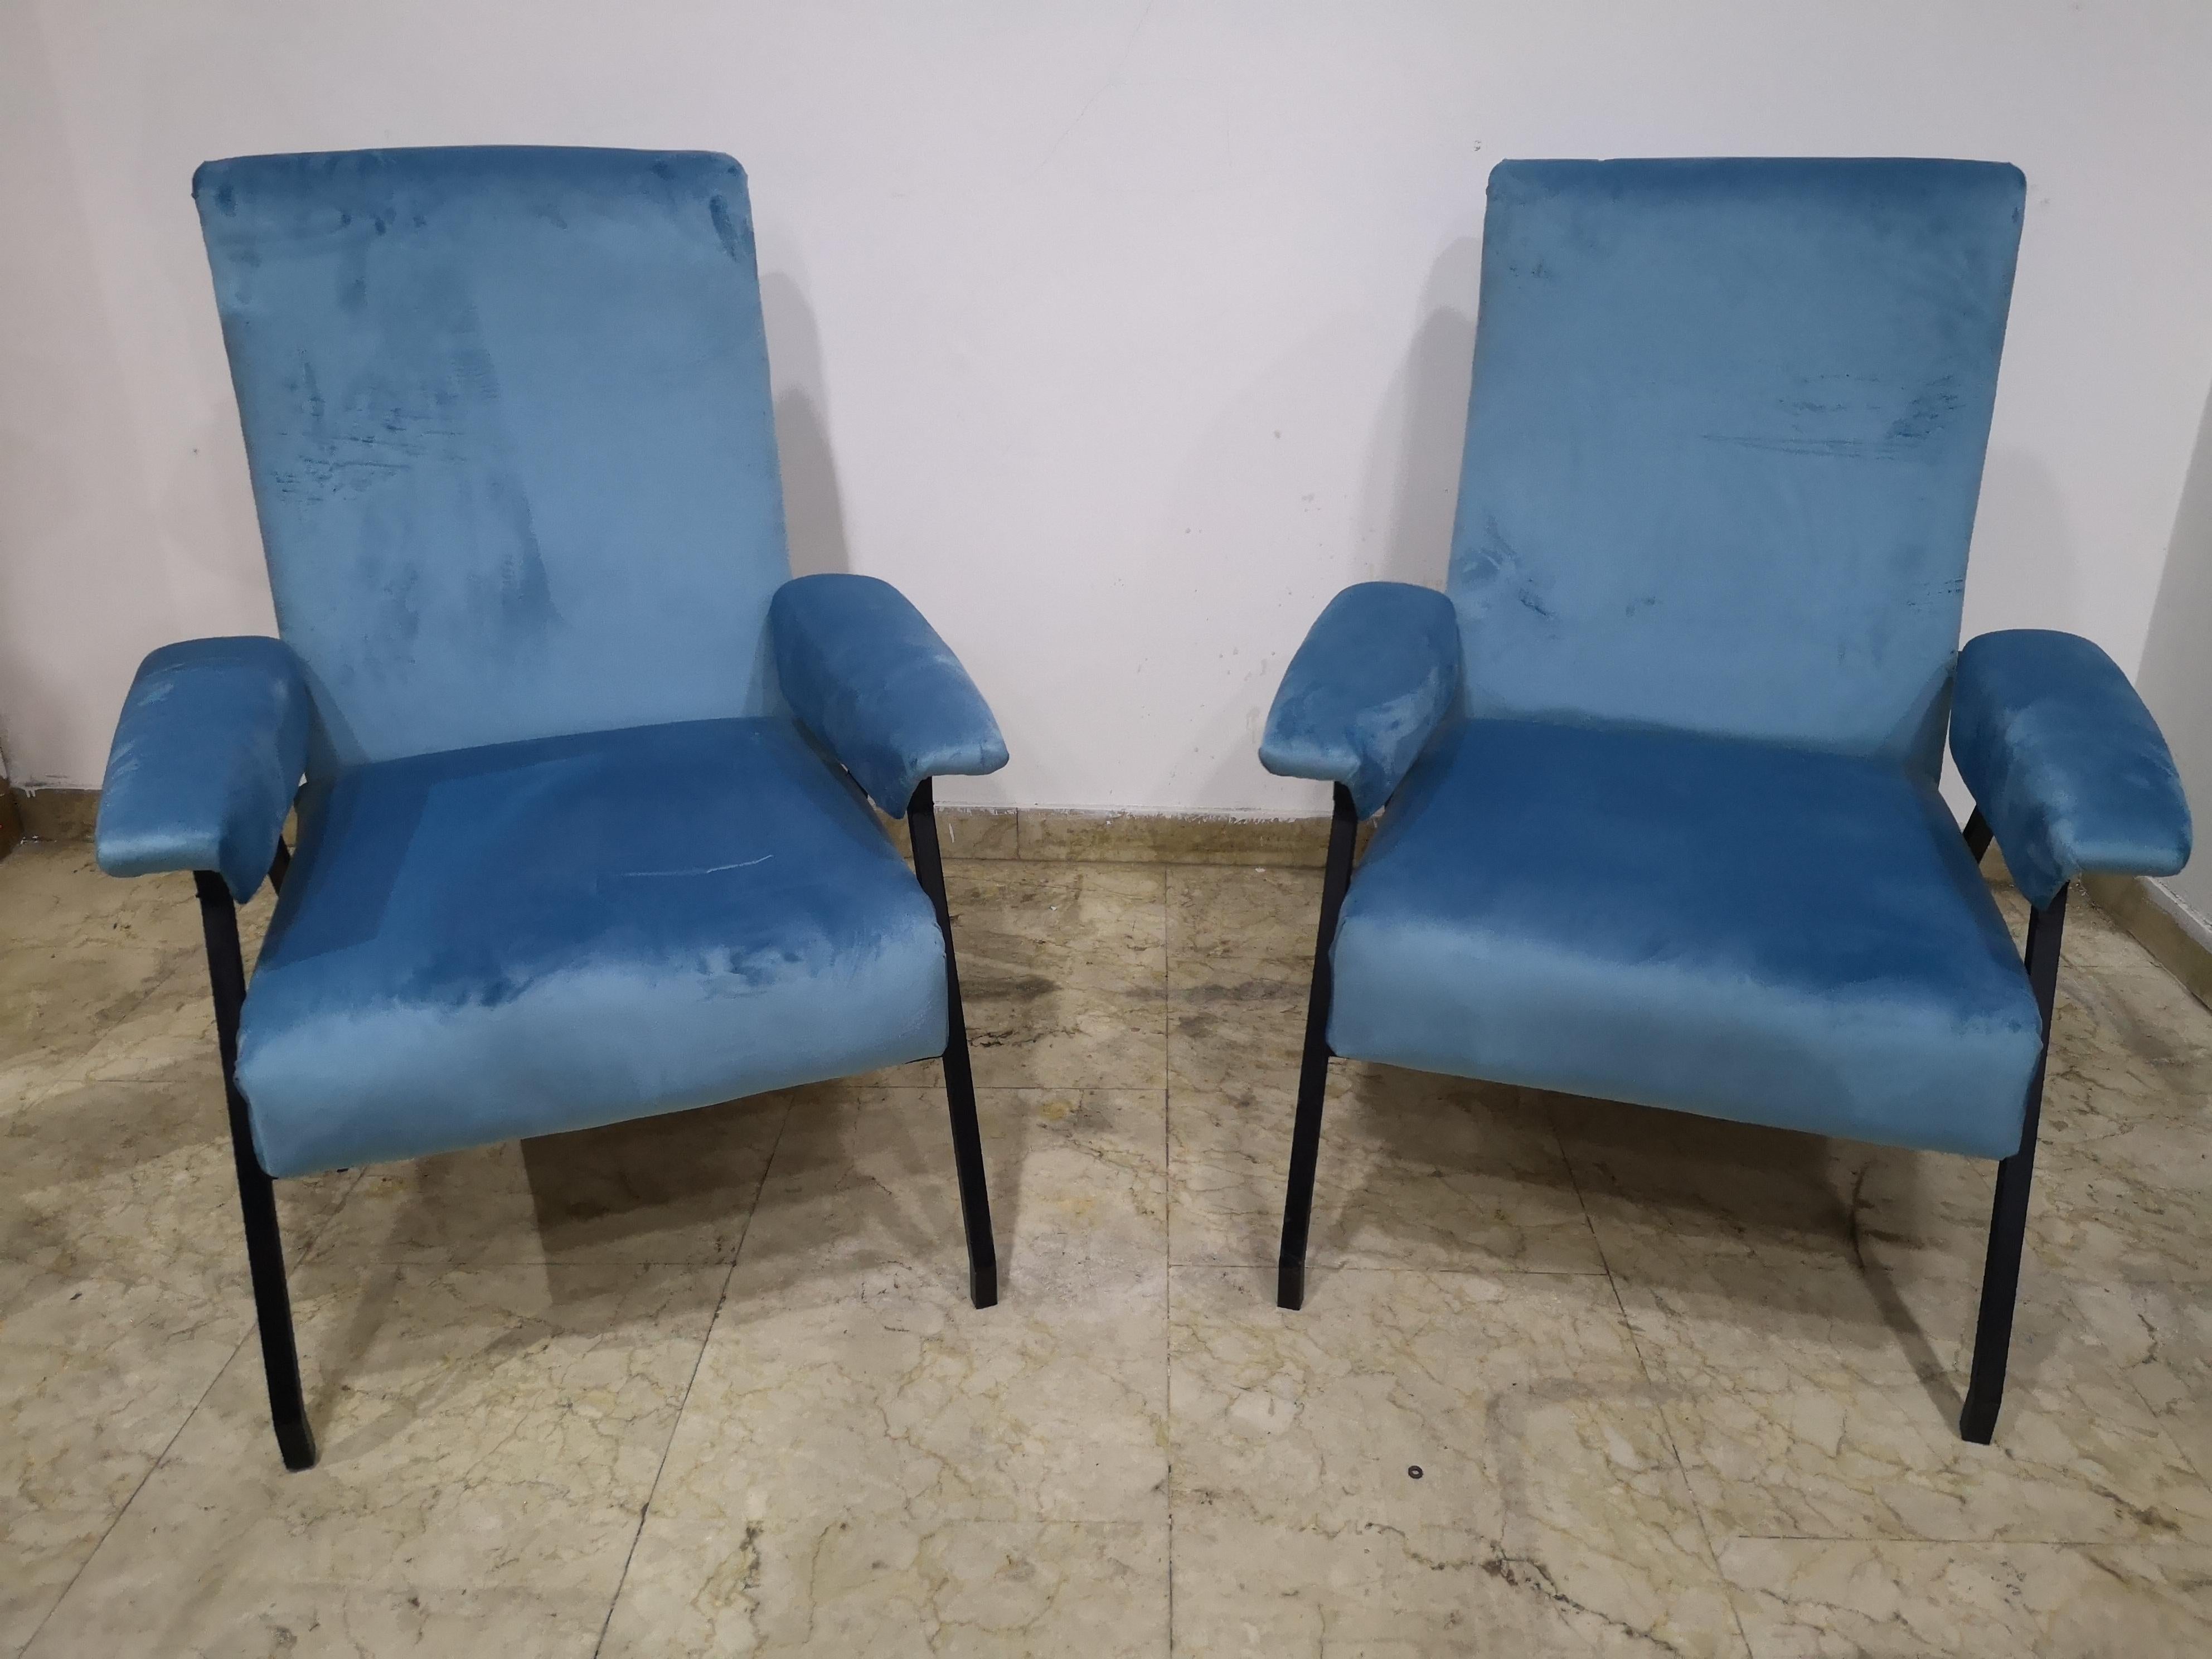 Pair of 1970s armchairs of Italian design, in perfect condition. The armchairs have iron frames and are reclining. They were restored in blue velvet.